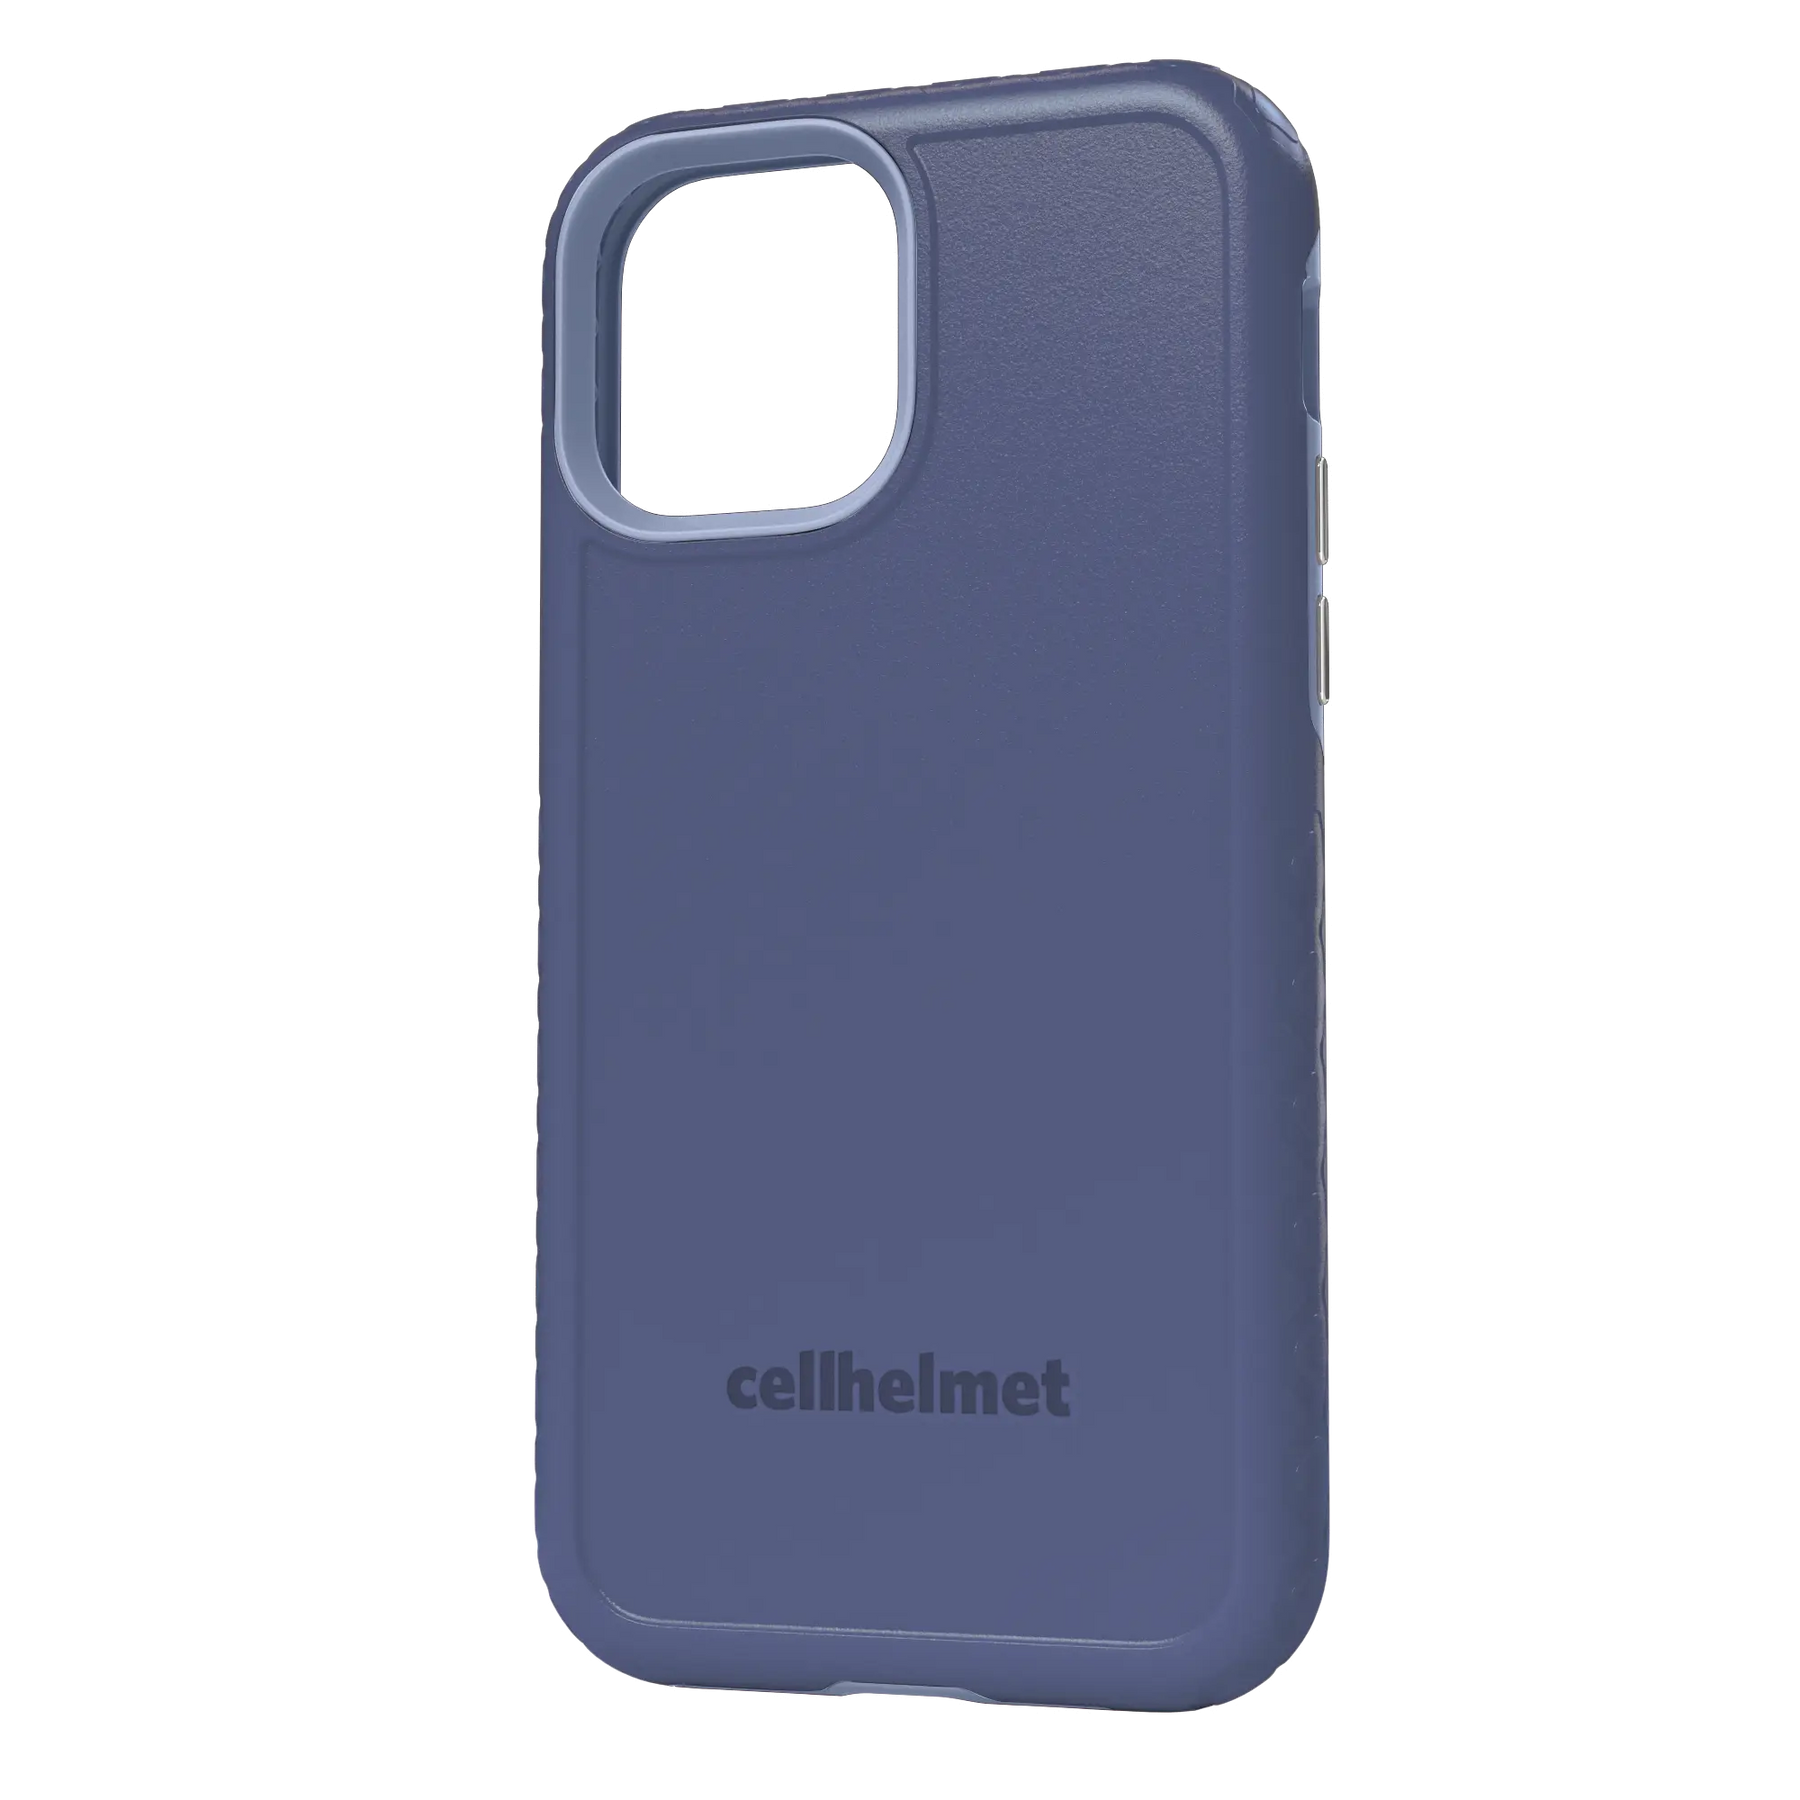 Blue cellhelmet Personalized Case for iPhone 12 Pro